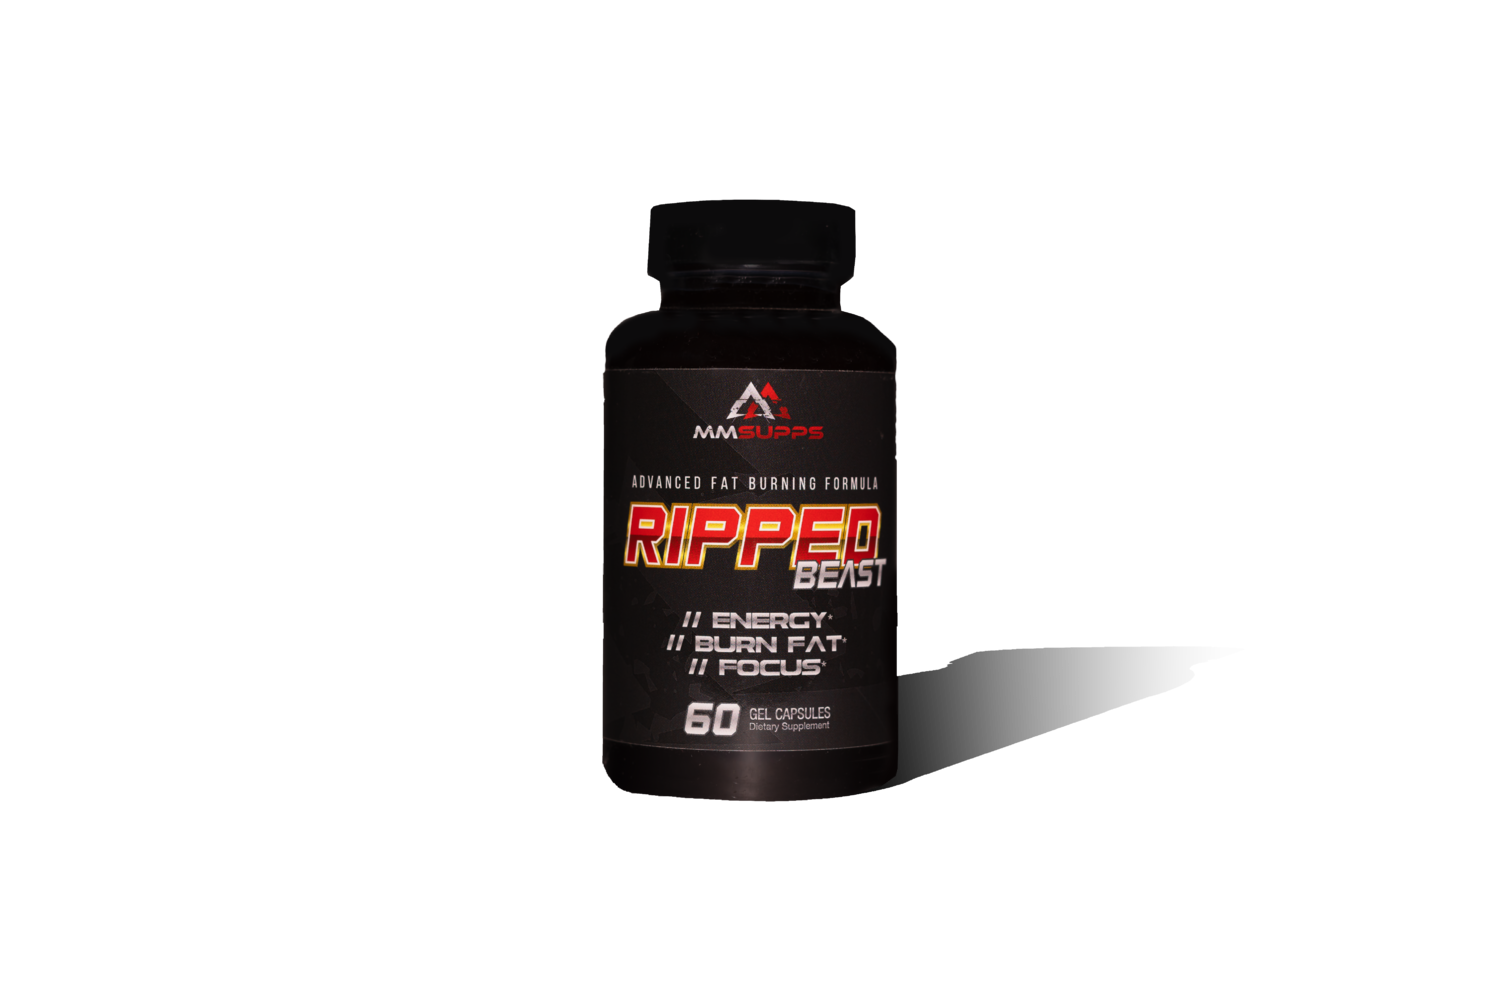 ripped beauty fat burner review